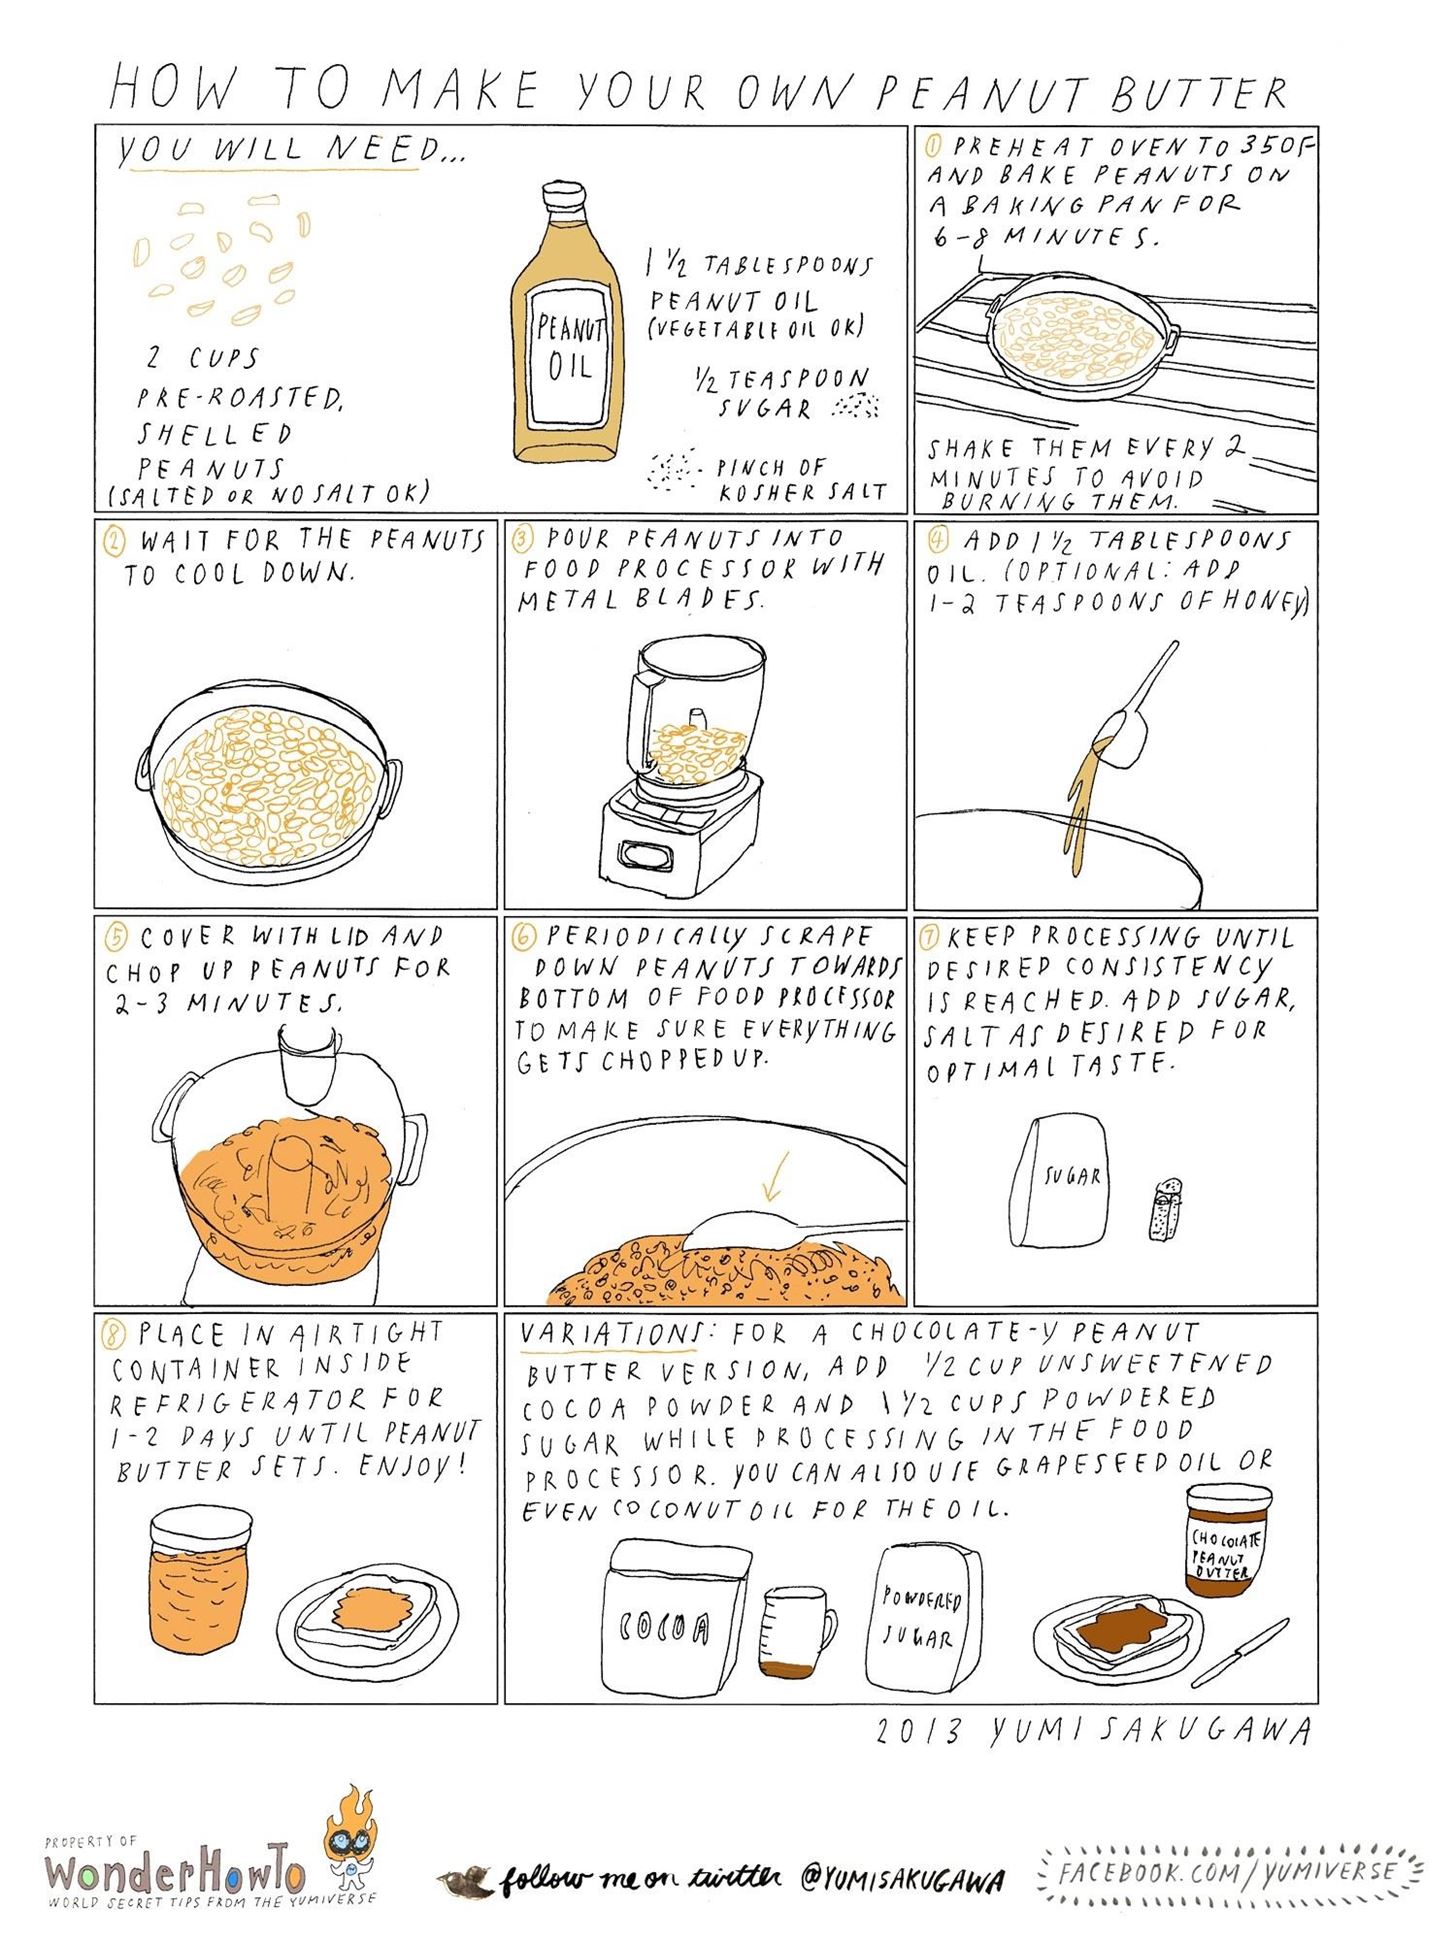 How to Make Your Own Peanut Butter at Home